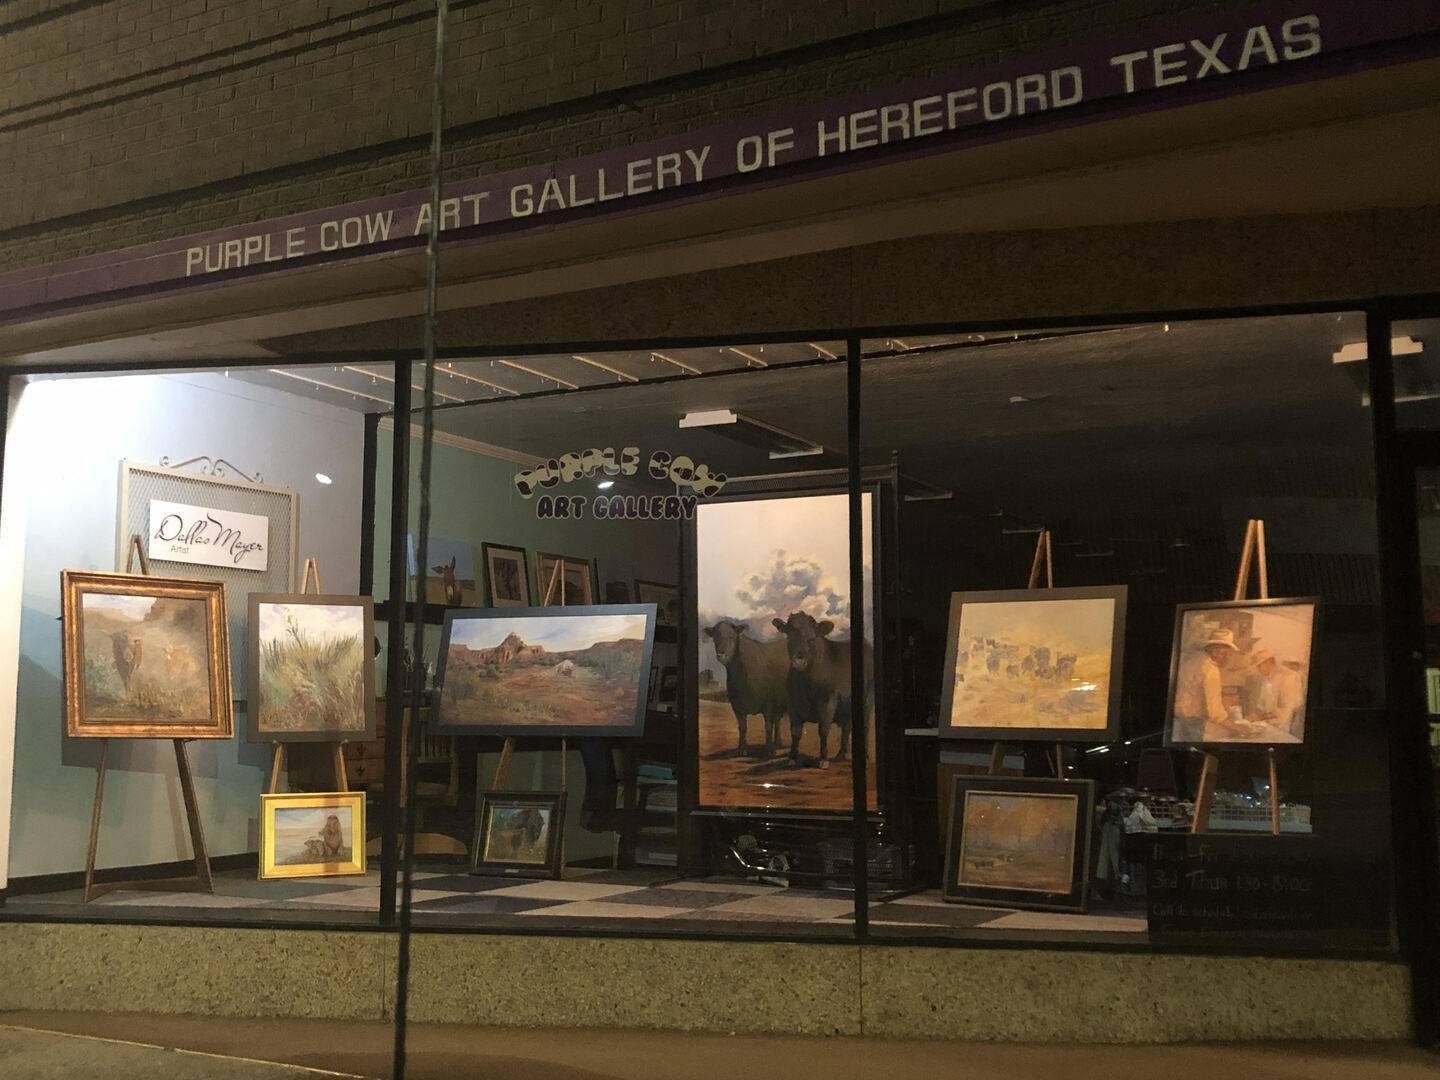 Purple Cow Art Gallery of Hereford Texas